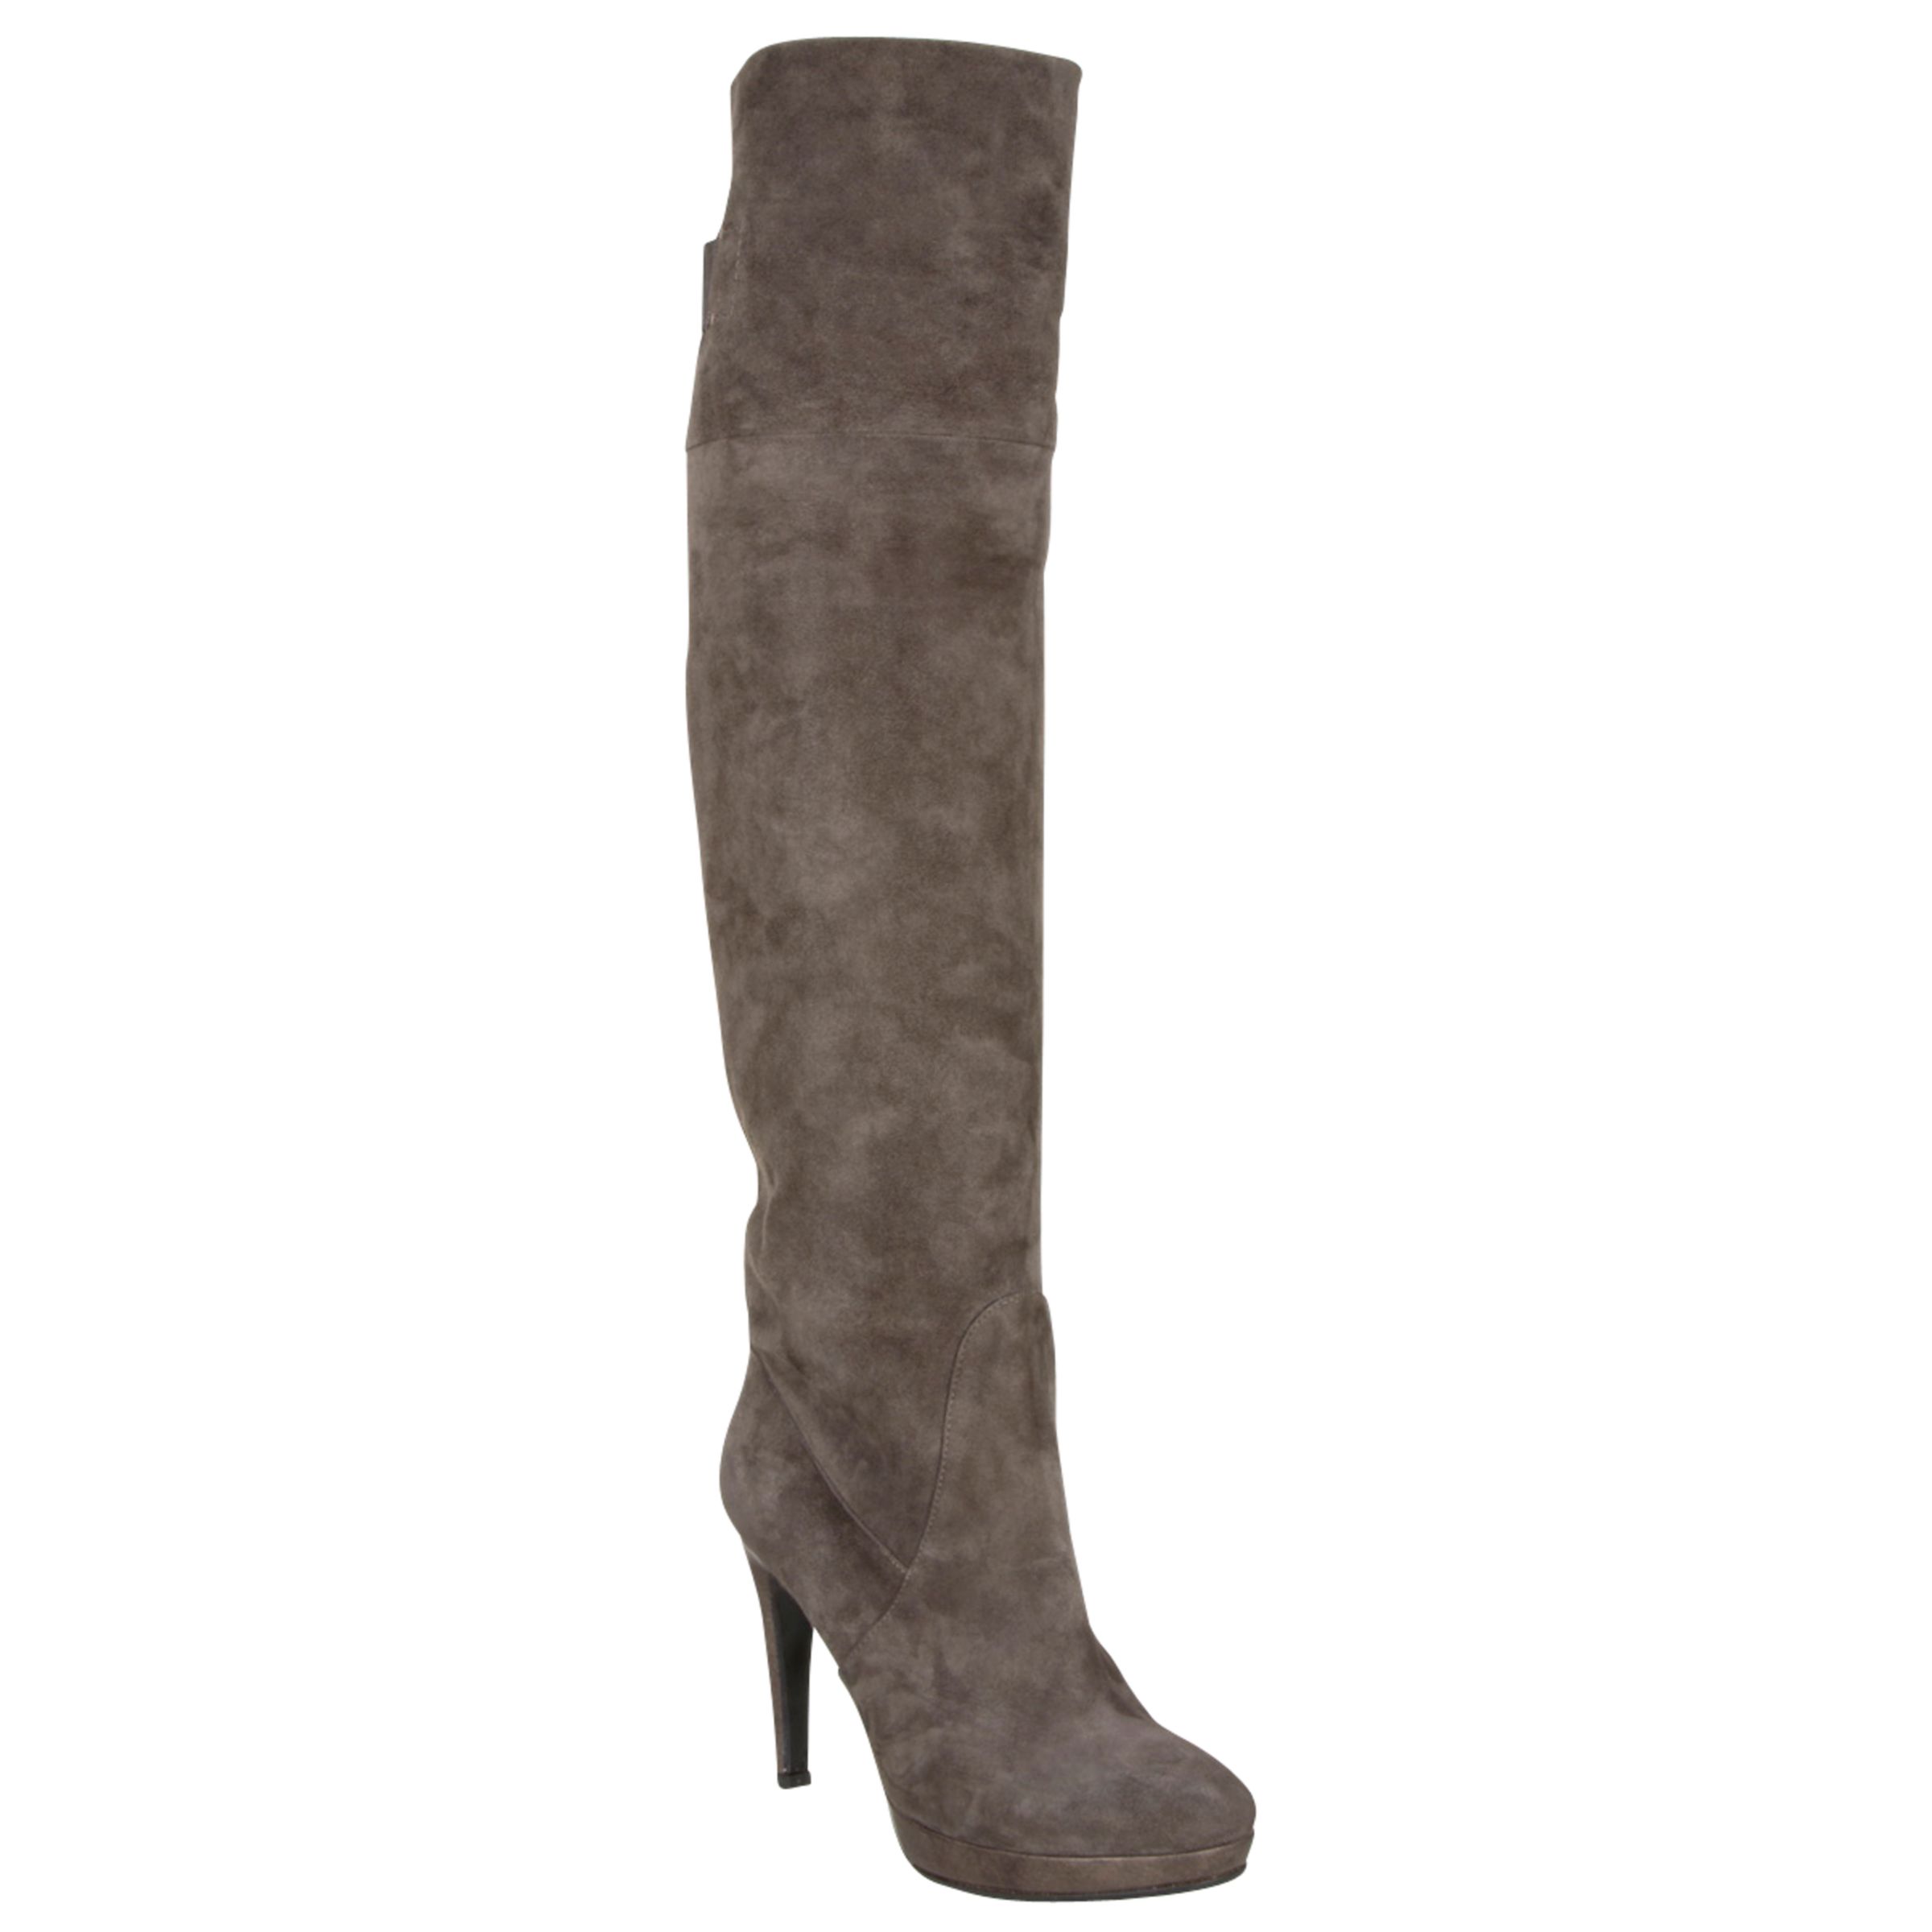 Pied A Terre Roswell Slouchy Cuff Over The Knee Boots, Taupe at JohnLewis